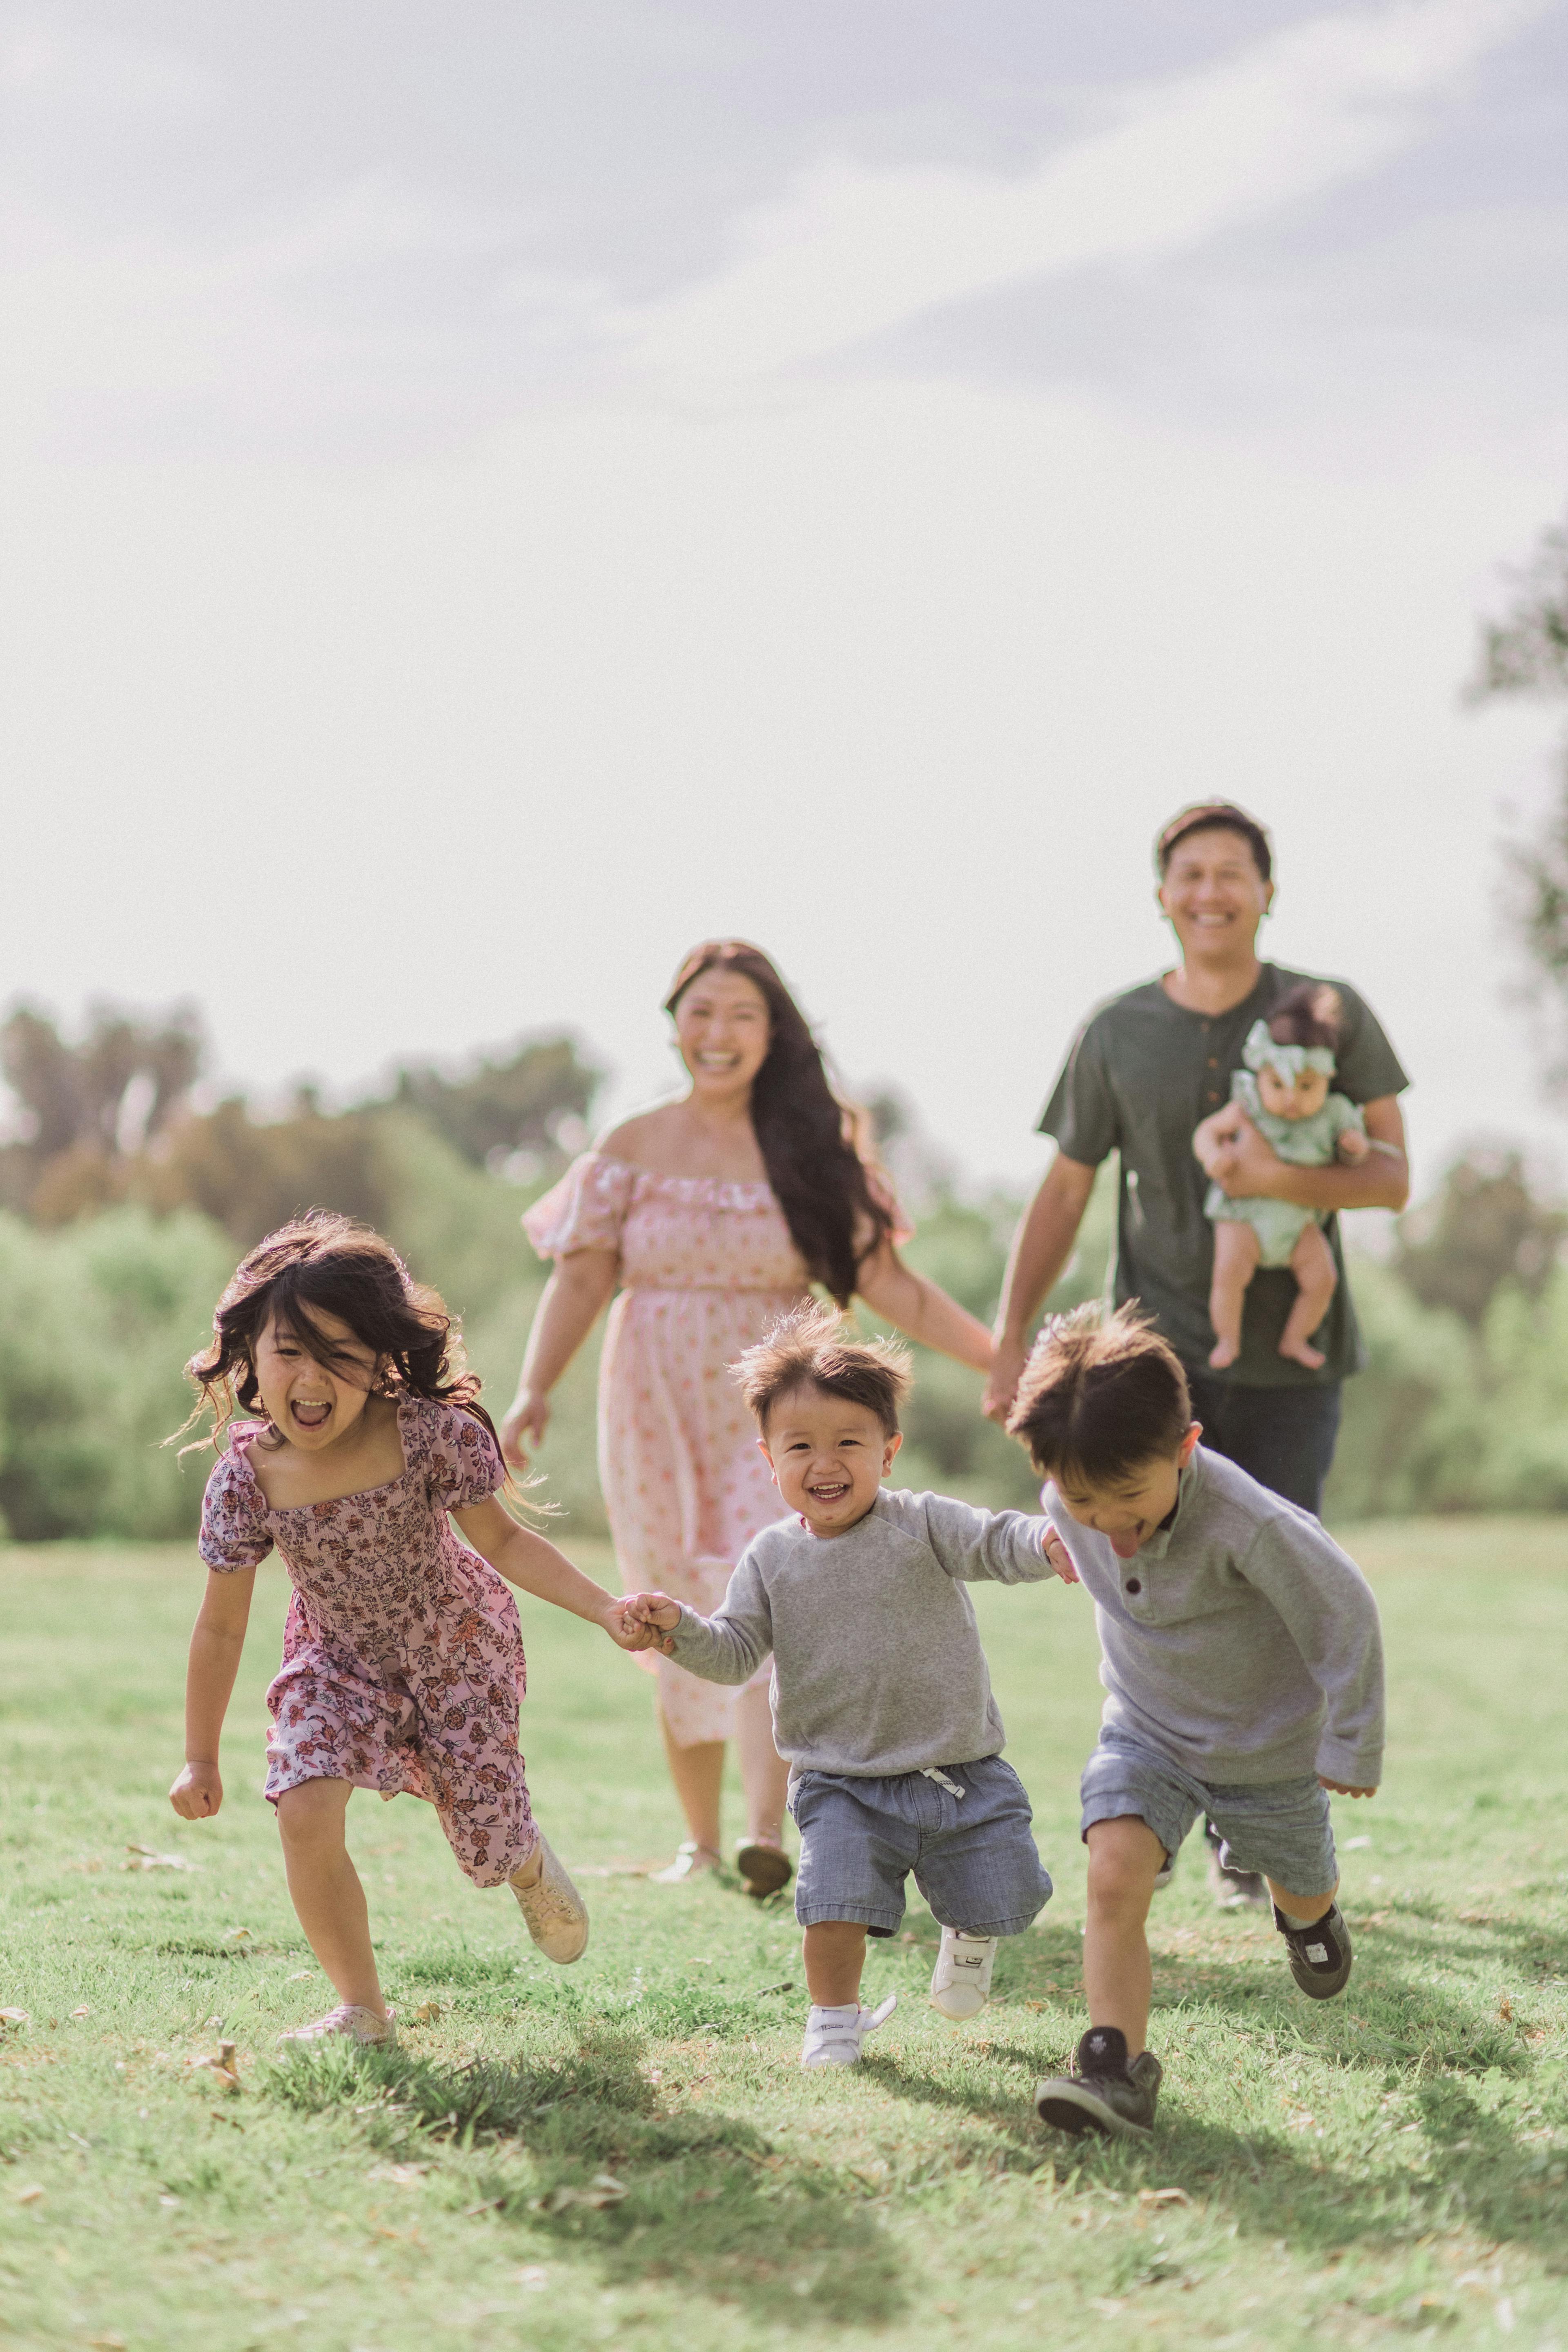 A happy family with two adults and three children running playfully on a grassy field.